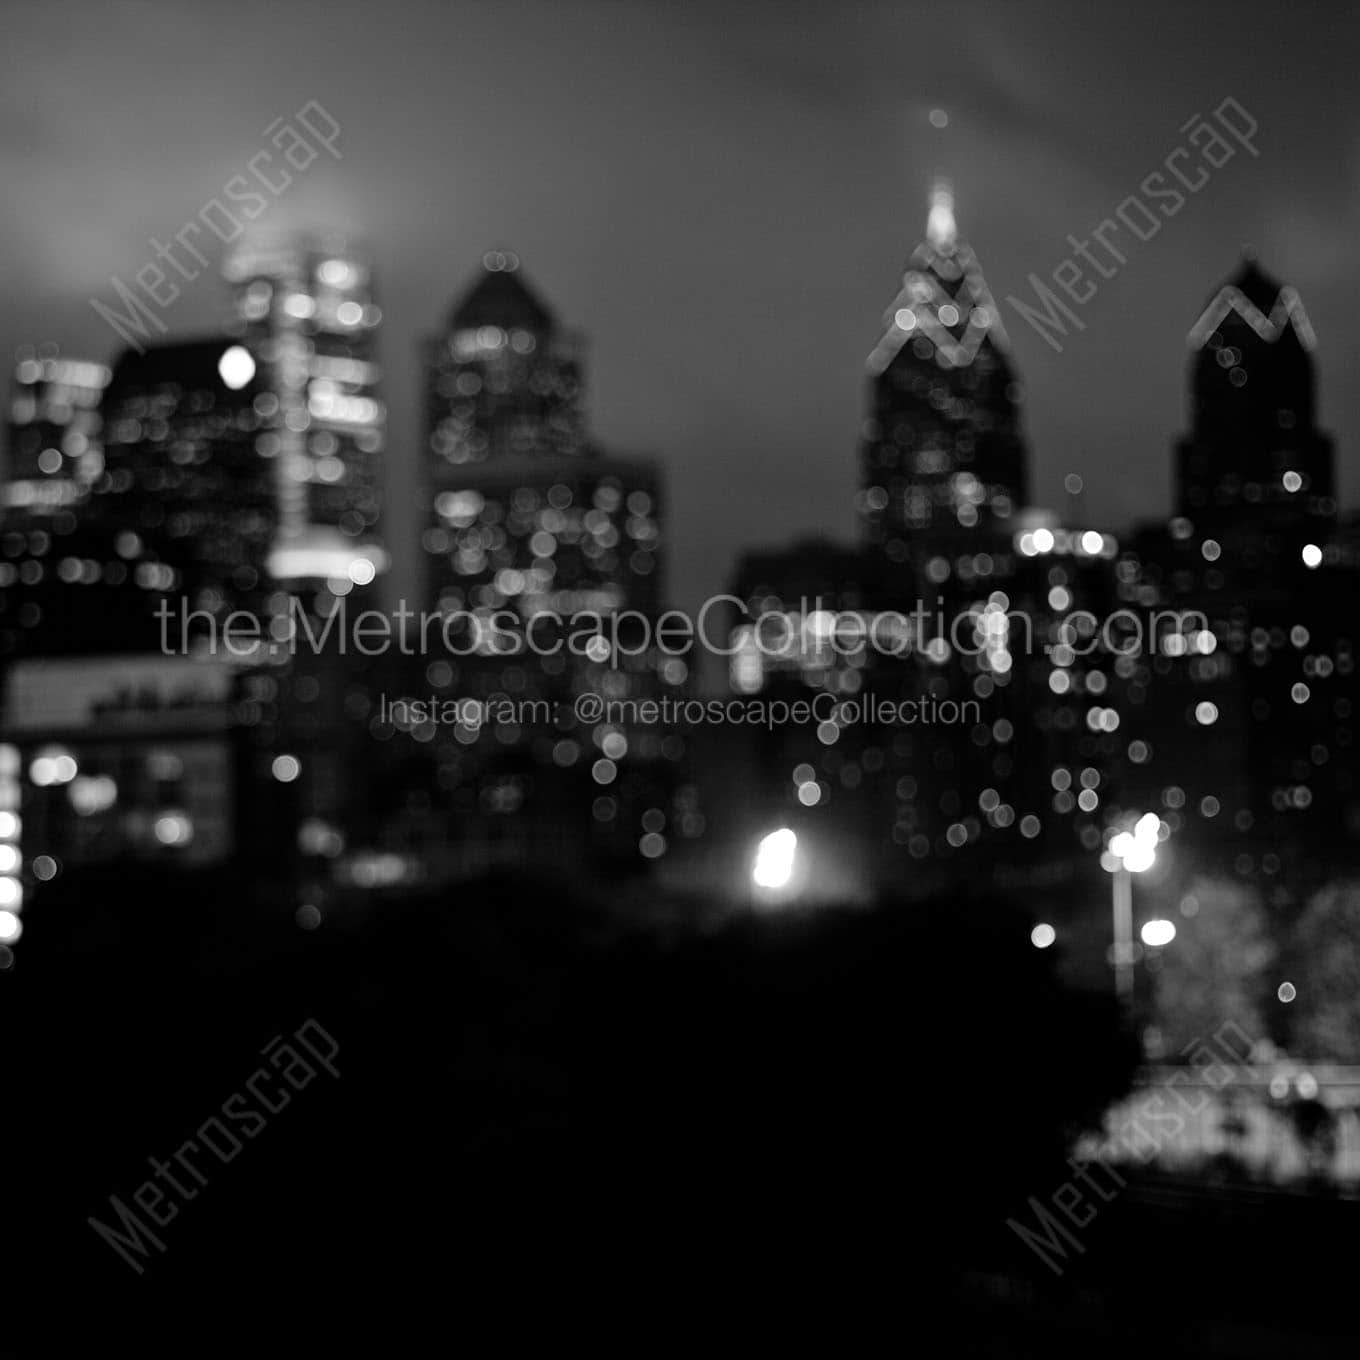 philly skyline out of focus Black & White Office Art